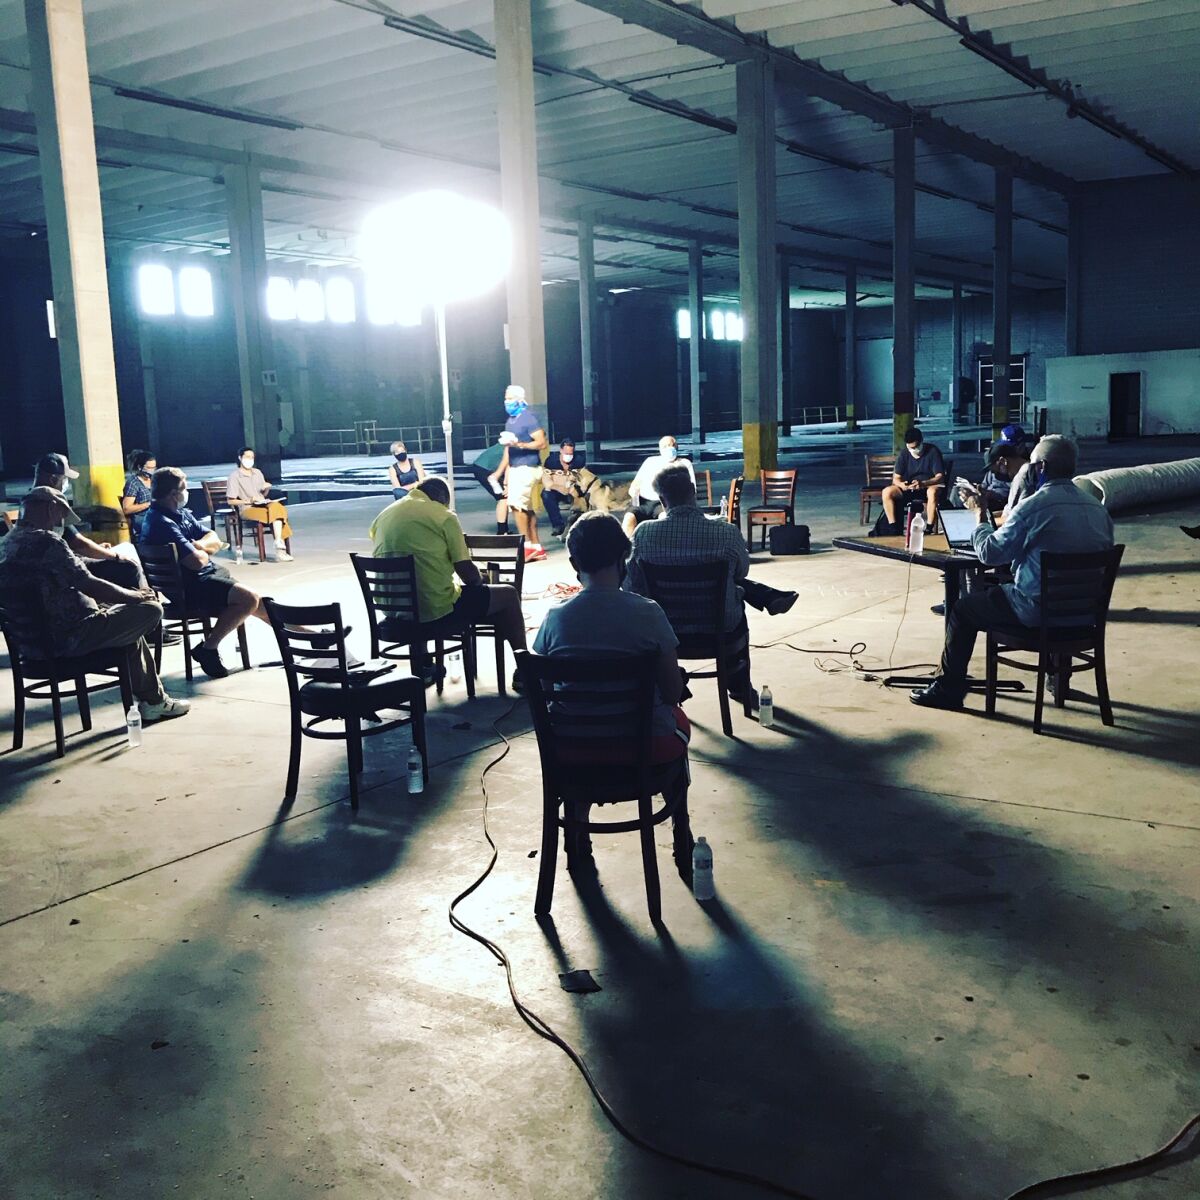 A shot of a production meeting using Covid-19 safety measures on the set of "The Card Counter" in Biloxi, Mississippi